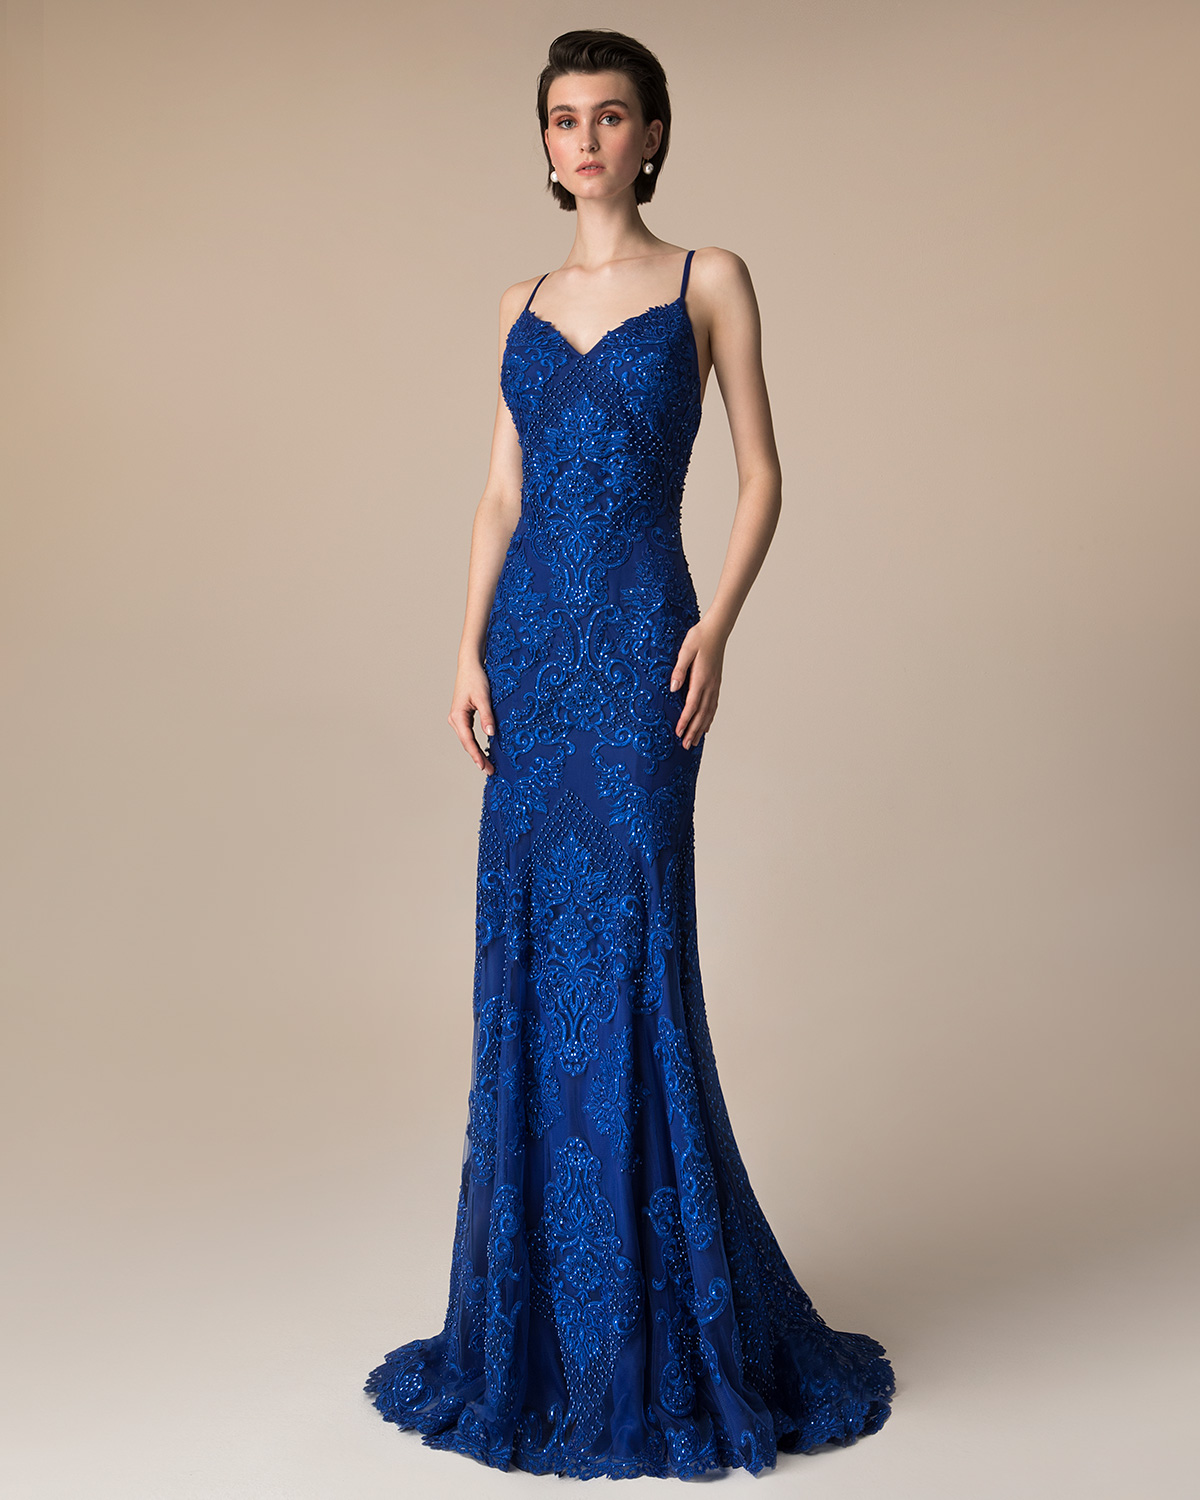 Evening Dresses / Long evening dress with beading and applique lace